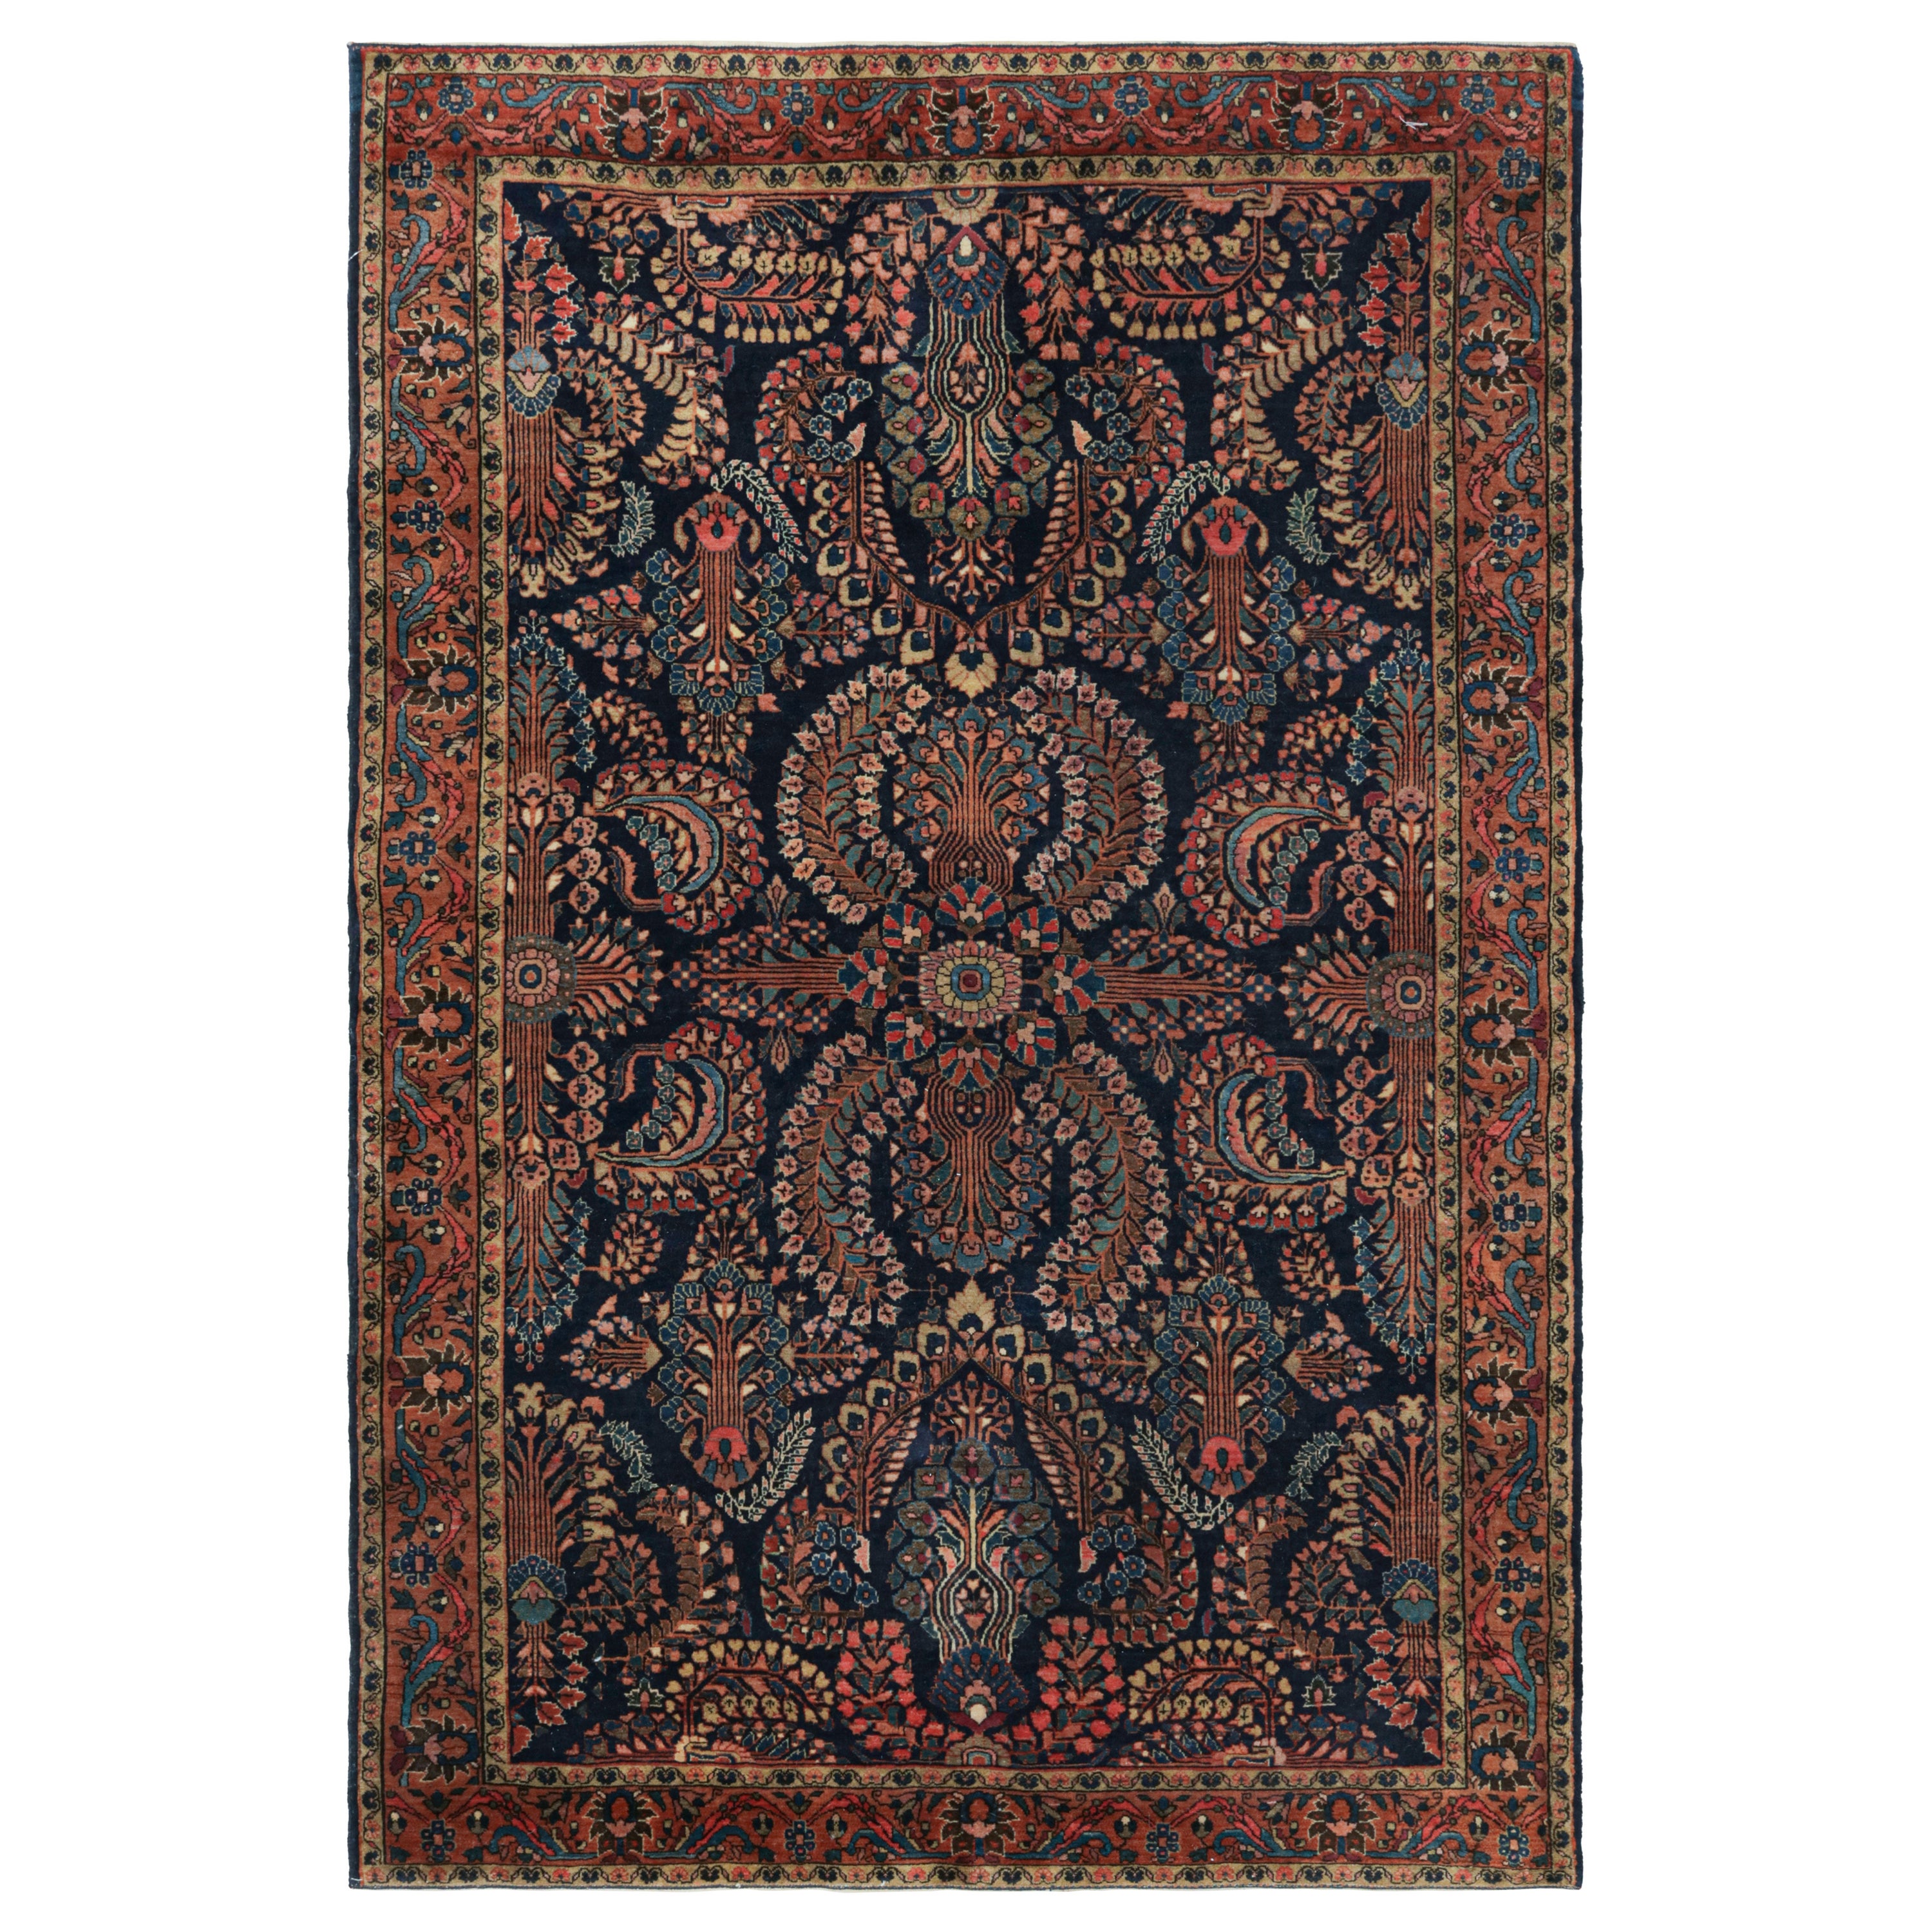 Rug & Kilim’s Persian Sarouk Farahan Style Rug in Navy Blue with Floral Patterns For Sale